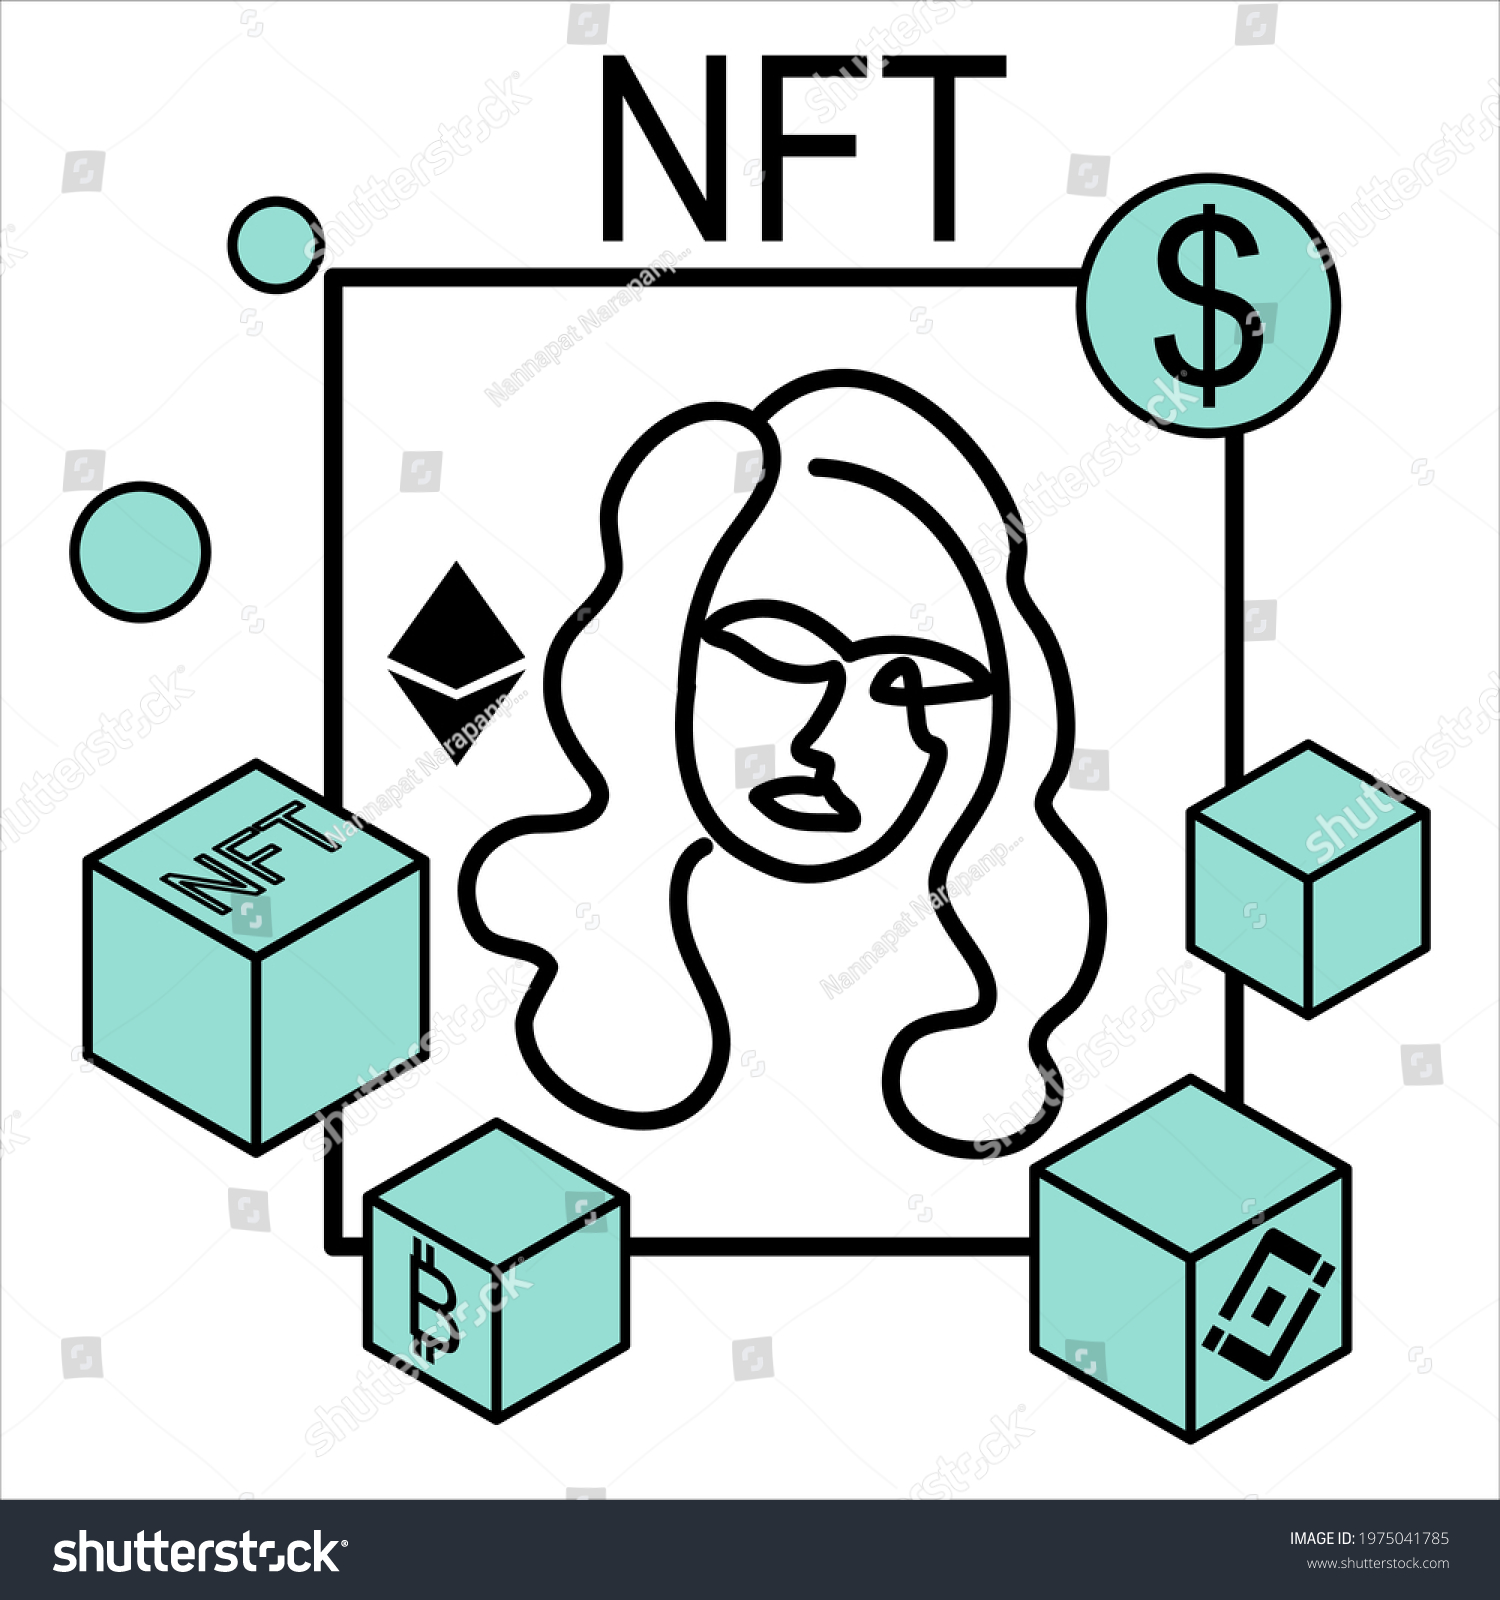 SVG of NFT - Non-Fungible Token, binance chain and euthereum chain vector illustration in infographic icon style svg